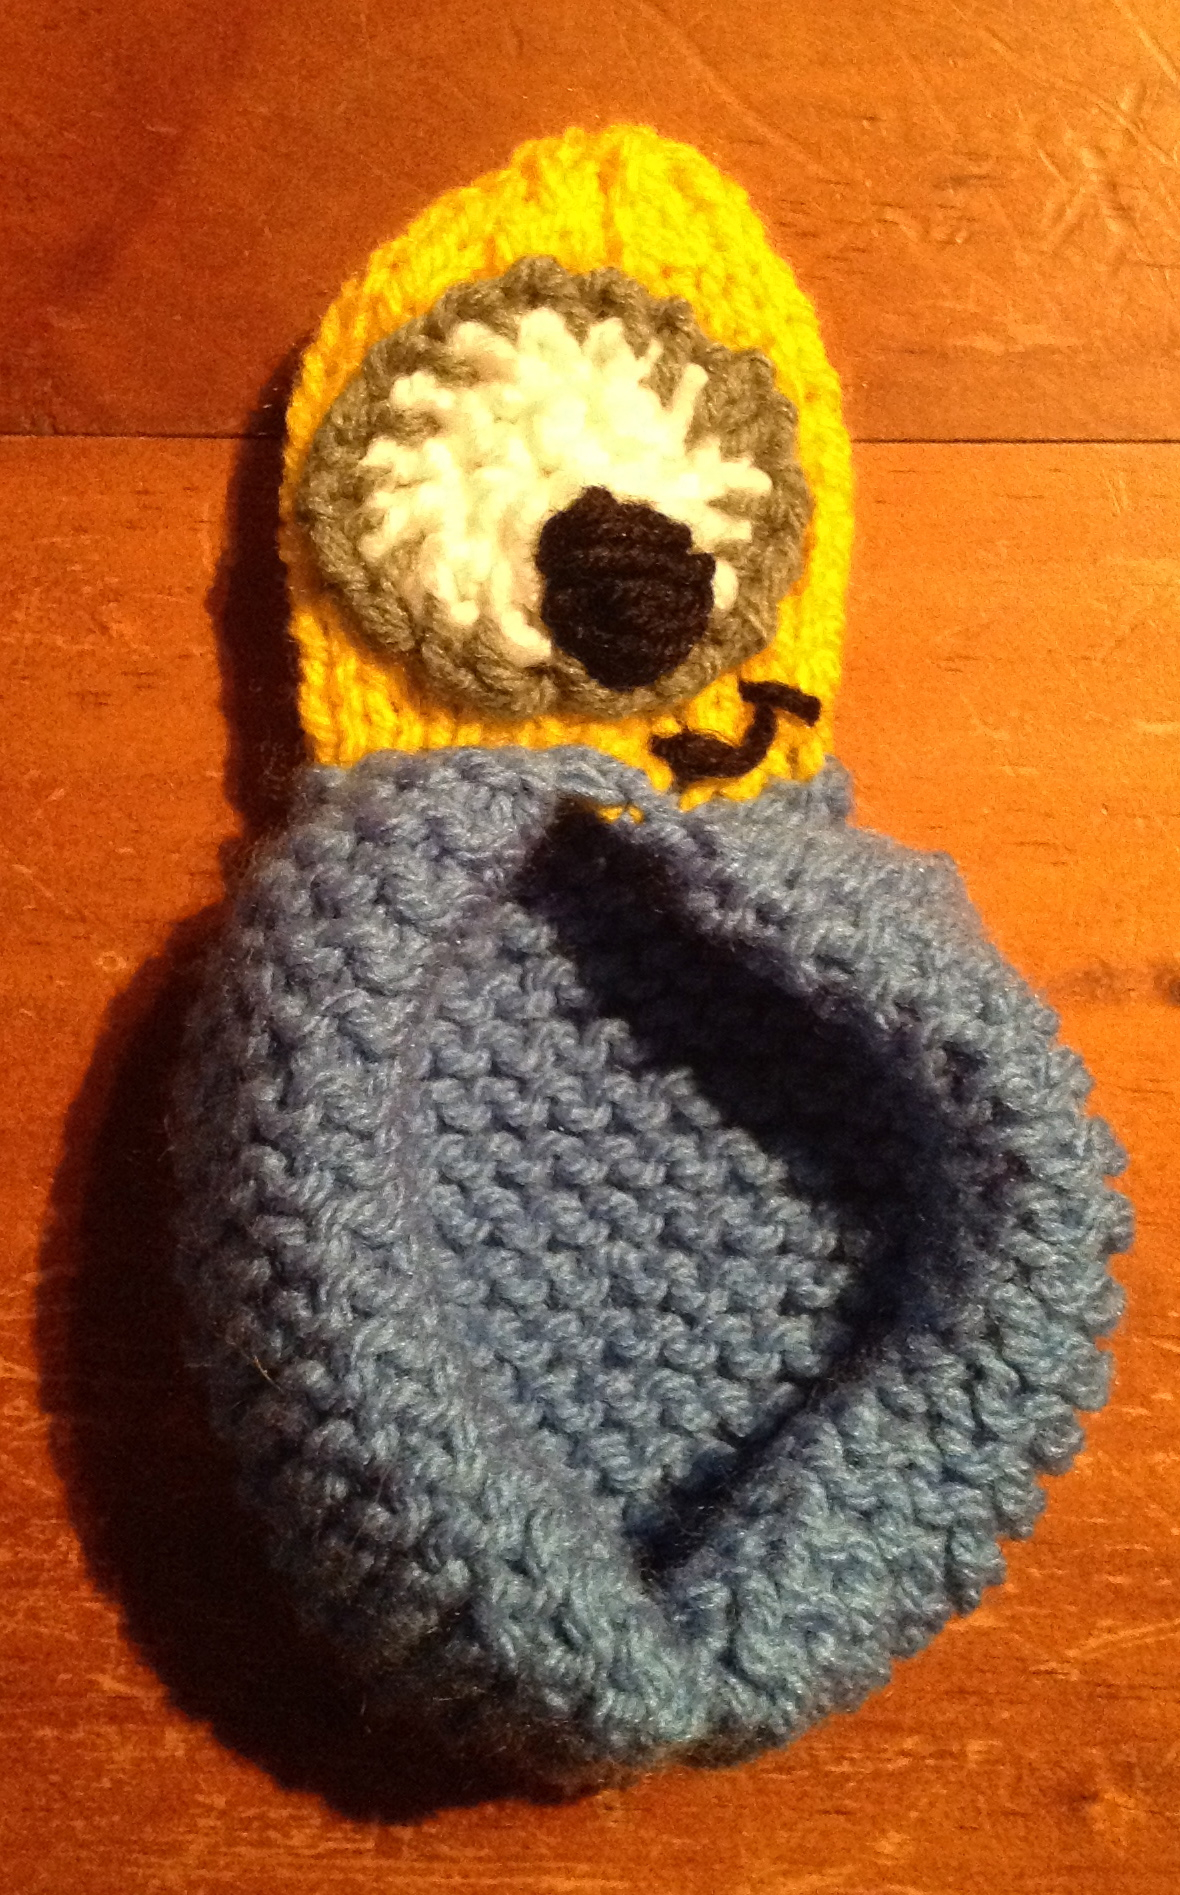 Knitting Patterns For Minions Free Despicable Me Minion Knitting Patterns The Knit Guru